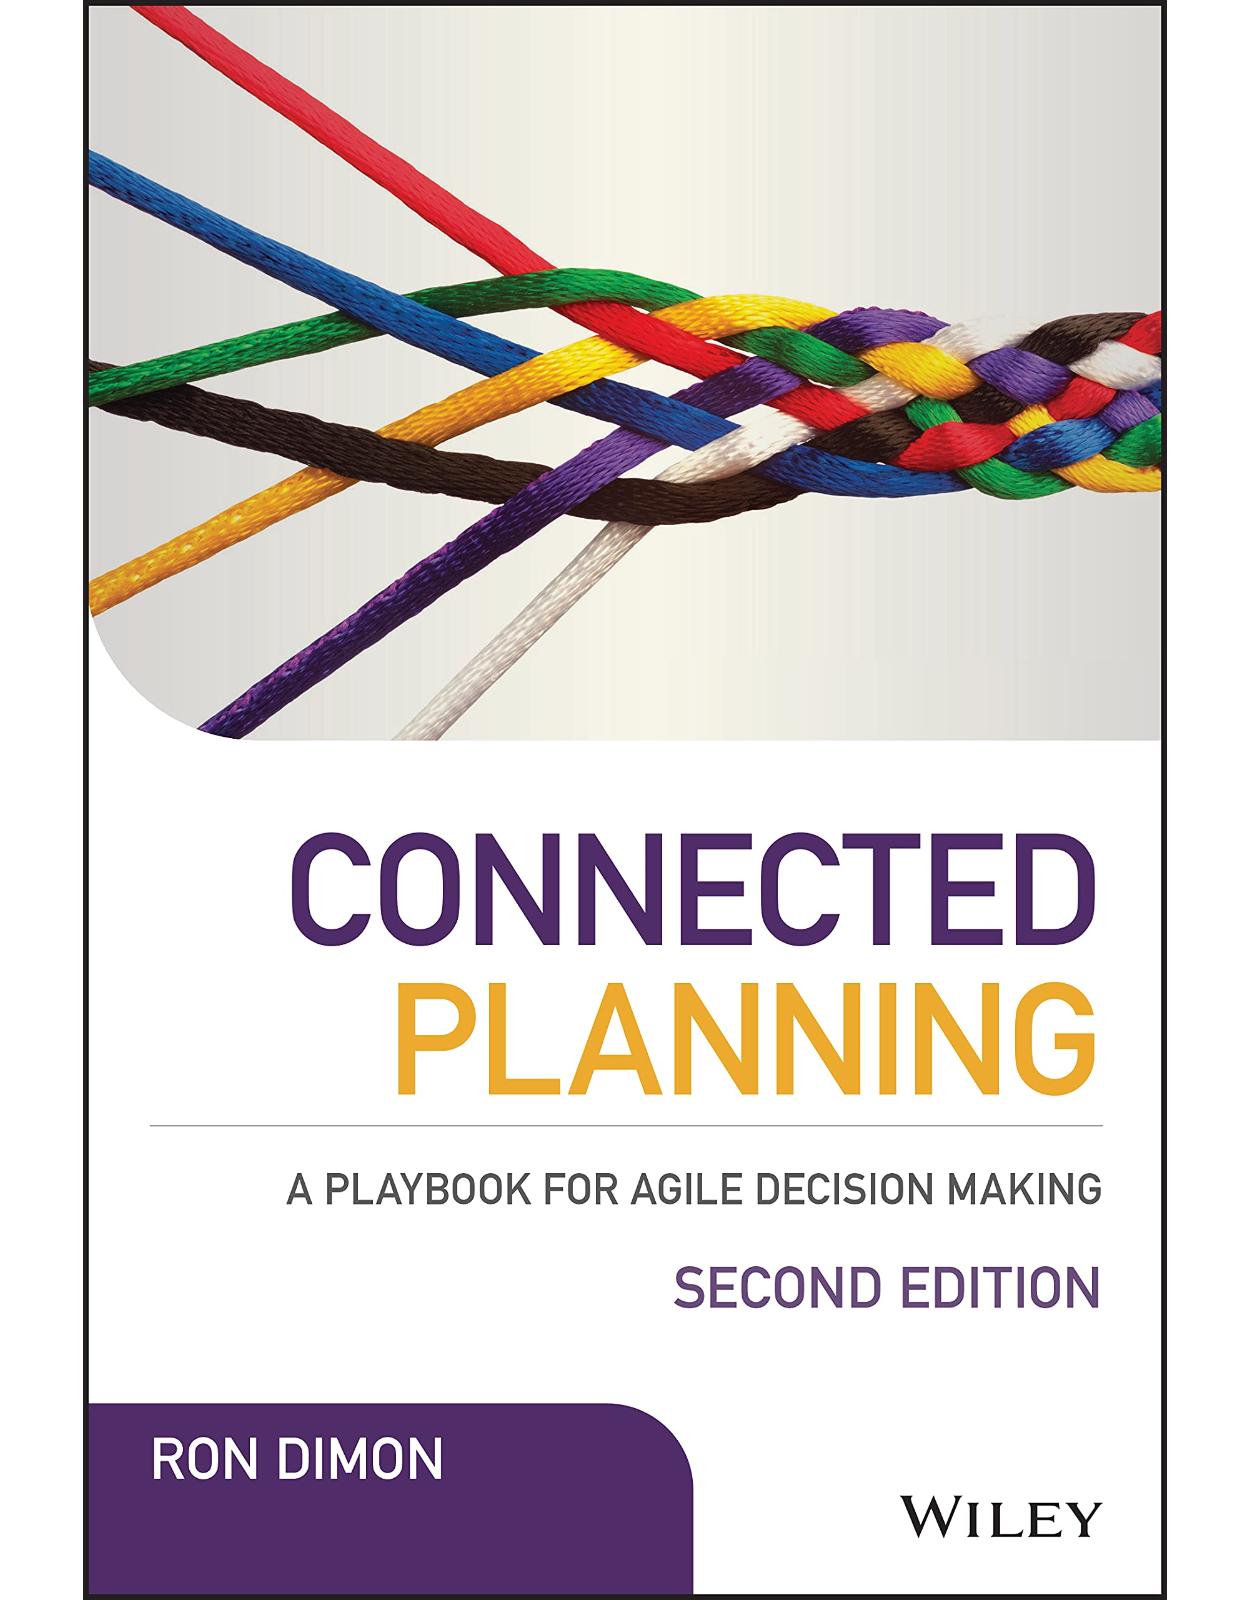 Connected Planning: A Playbook for Agile Decision Making (Wiley CIO) 